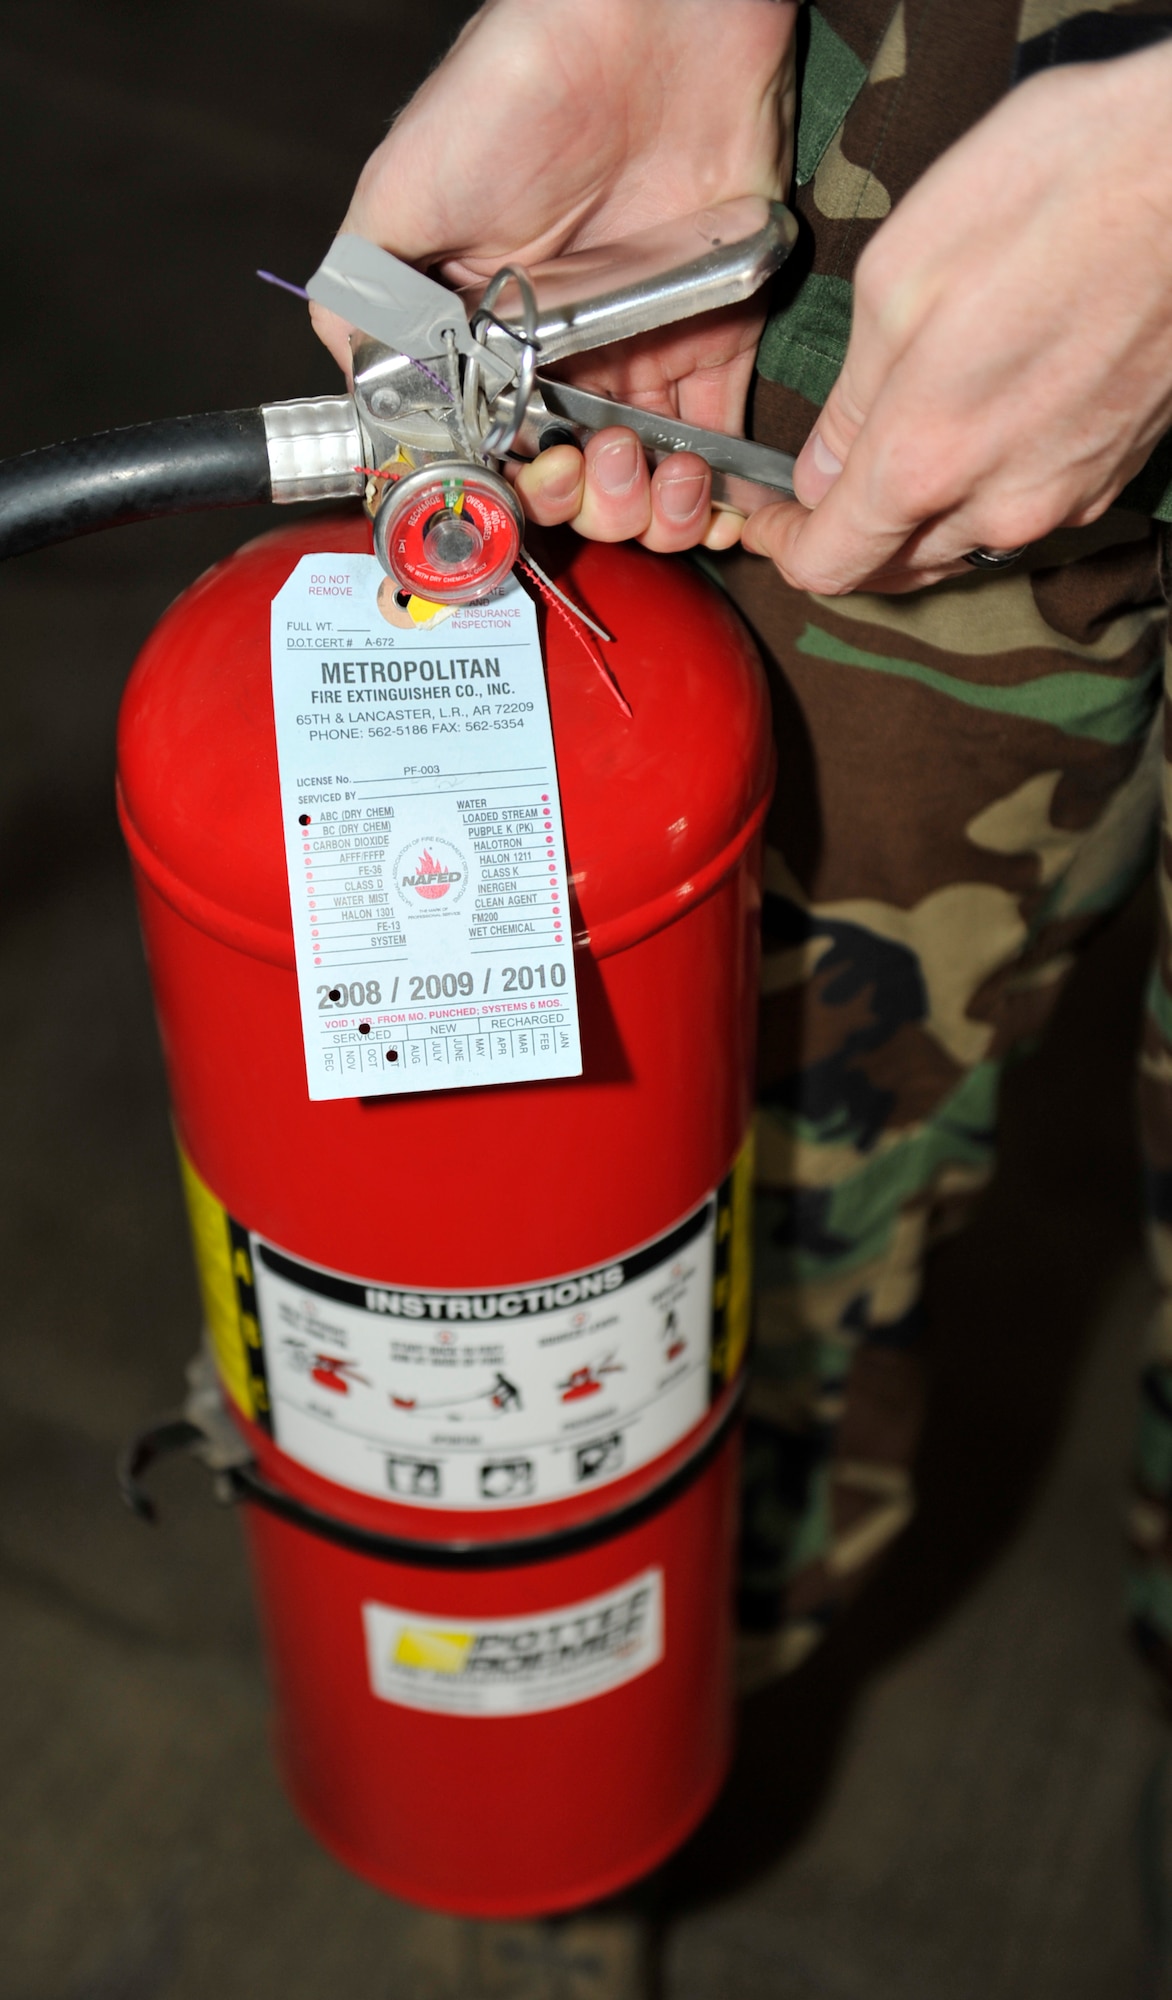 Airman 1st Class Andrew Sloan, 19th Civil Engineering Squadron fire fighter, inspects a fire extinguisher Sept 21. A simple and easy way to remember how to operate a fire extinguisher is "P.A.S.S." - pull, aim, squeeze and sweep. (U.S. Air Force photo by Airman 1st Class Lausanne Pacheco)